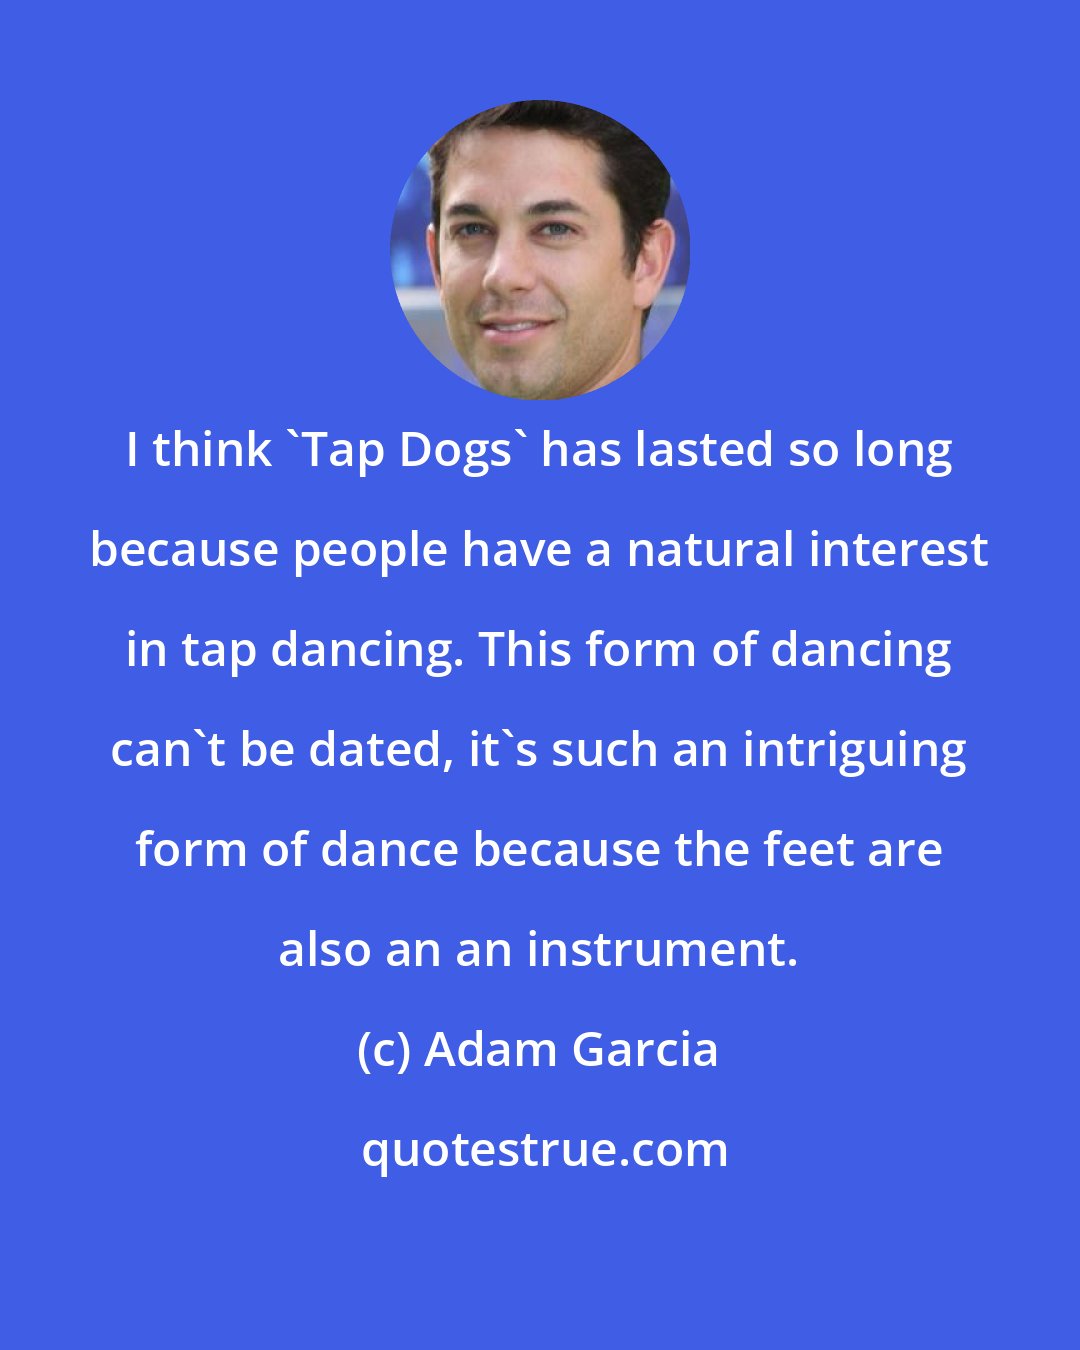 Adam Garcia: I think 'Tap Dogs' has lasted so long because people have a natural interest in tap dancing. This form of dancing can't be dated, it's such an intriguing form of dance because the feet are also an an instrument.